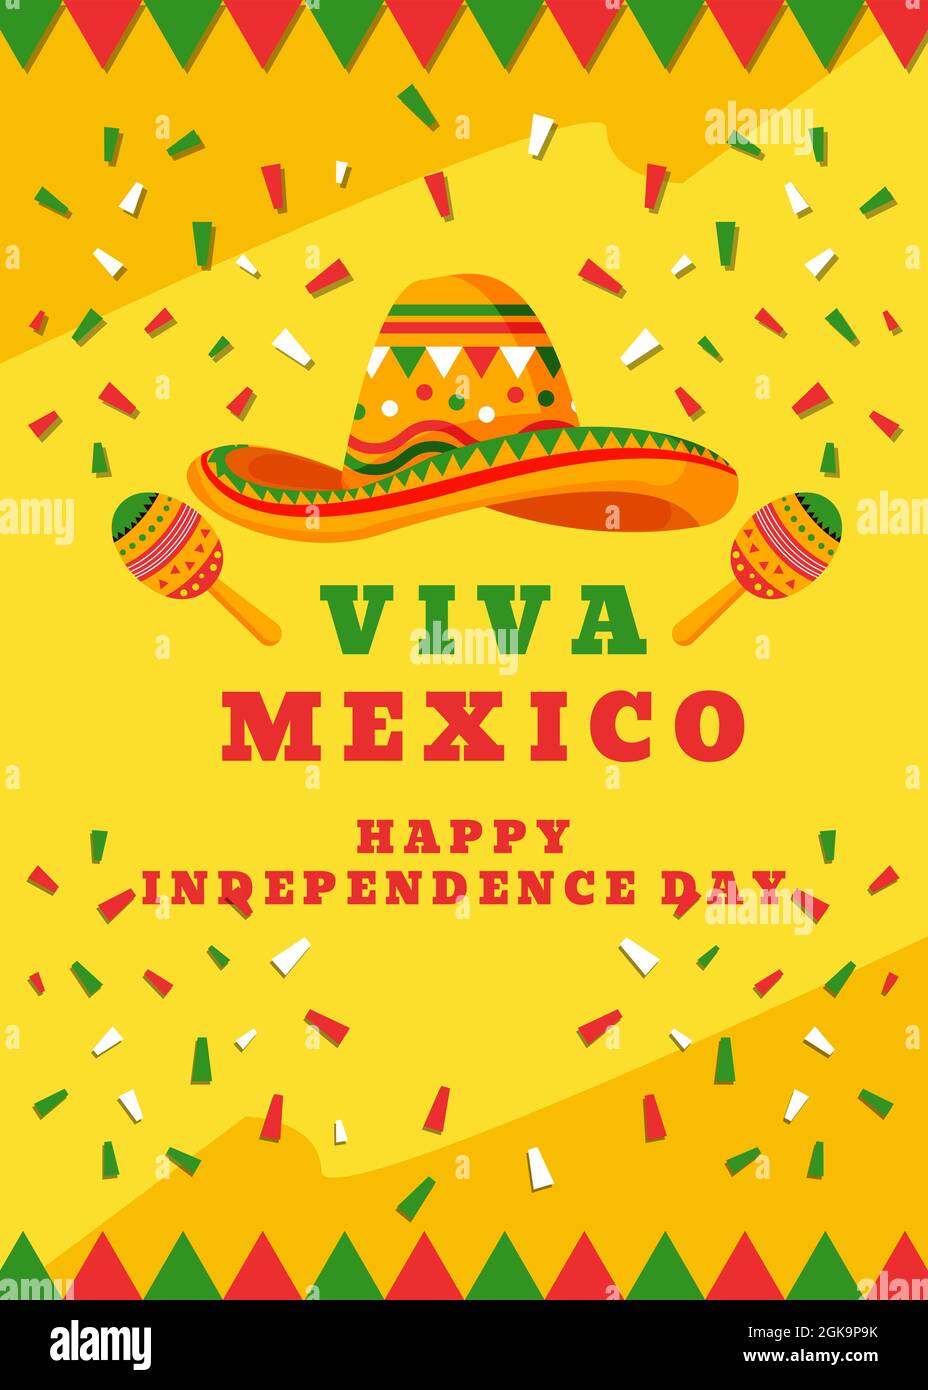 viva Mexico happy independence day vertical banner Stock Vector Image